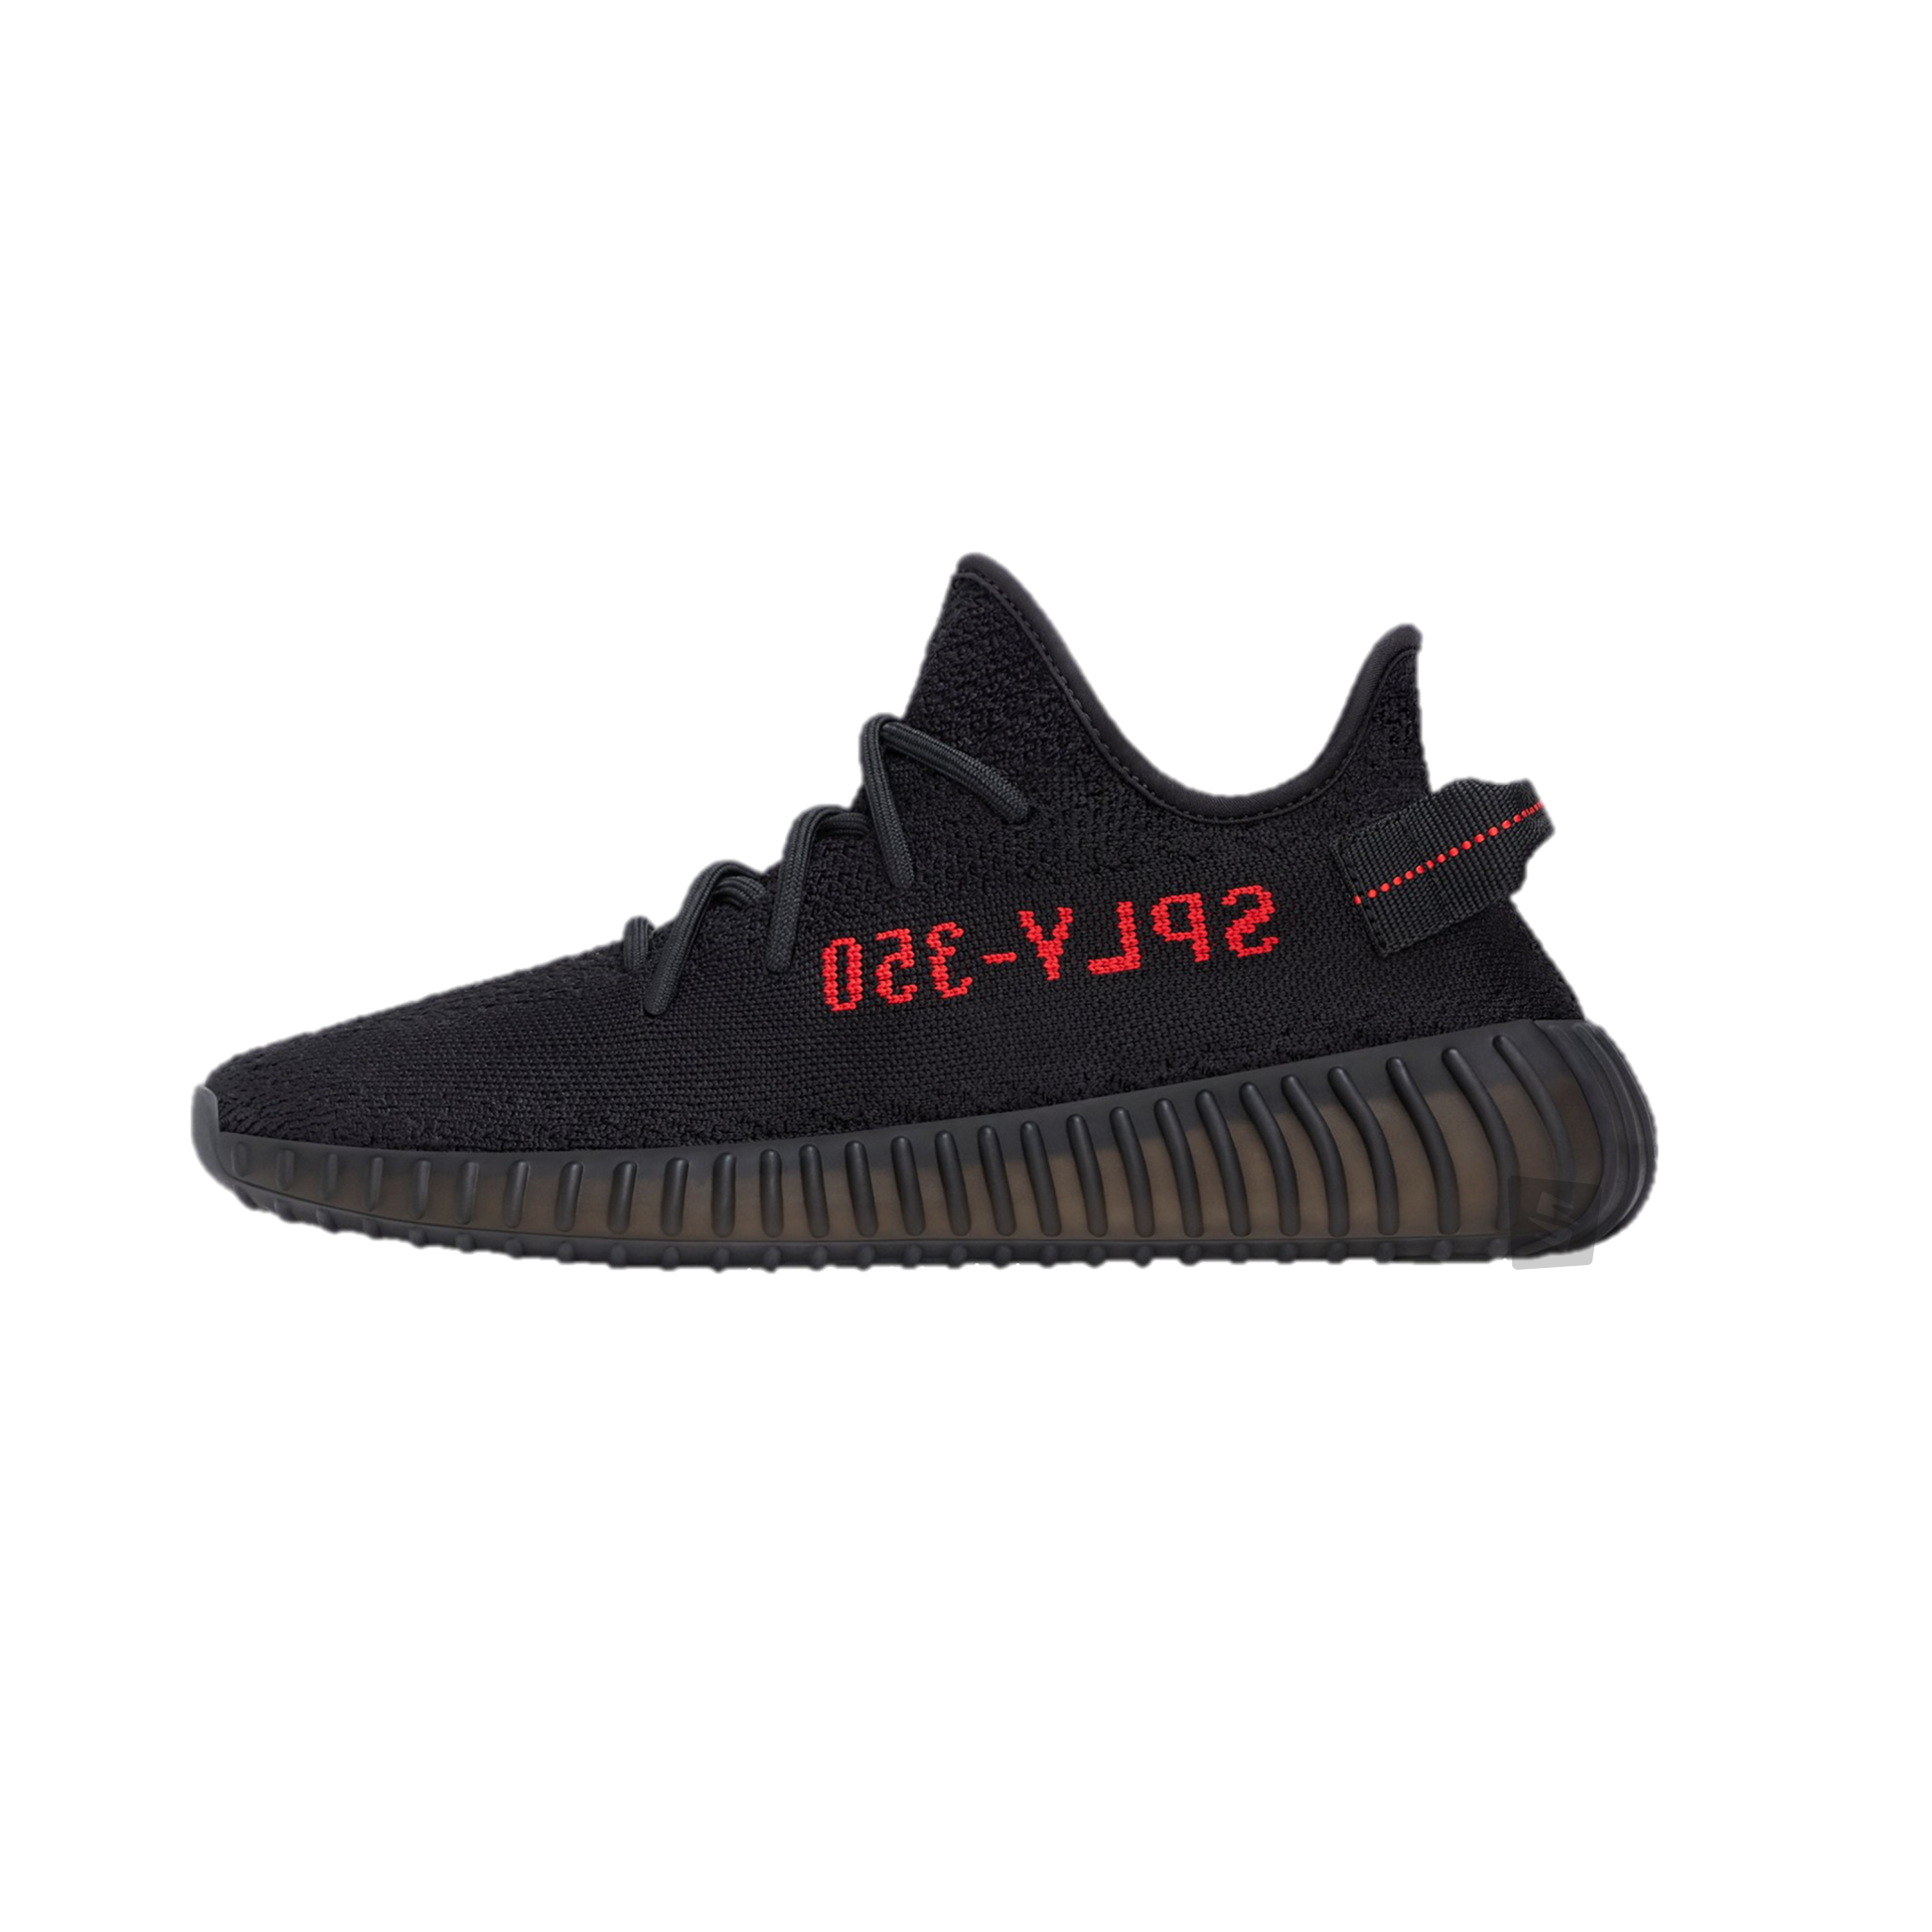 adidas Yeezy Boost 350 V2 'Bred' - Sneakin